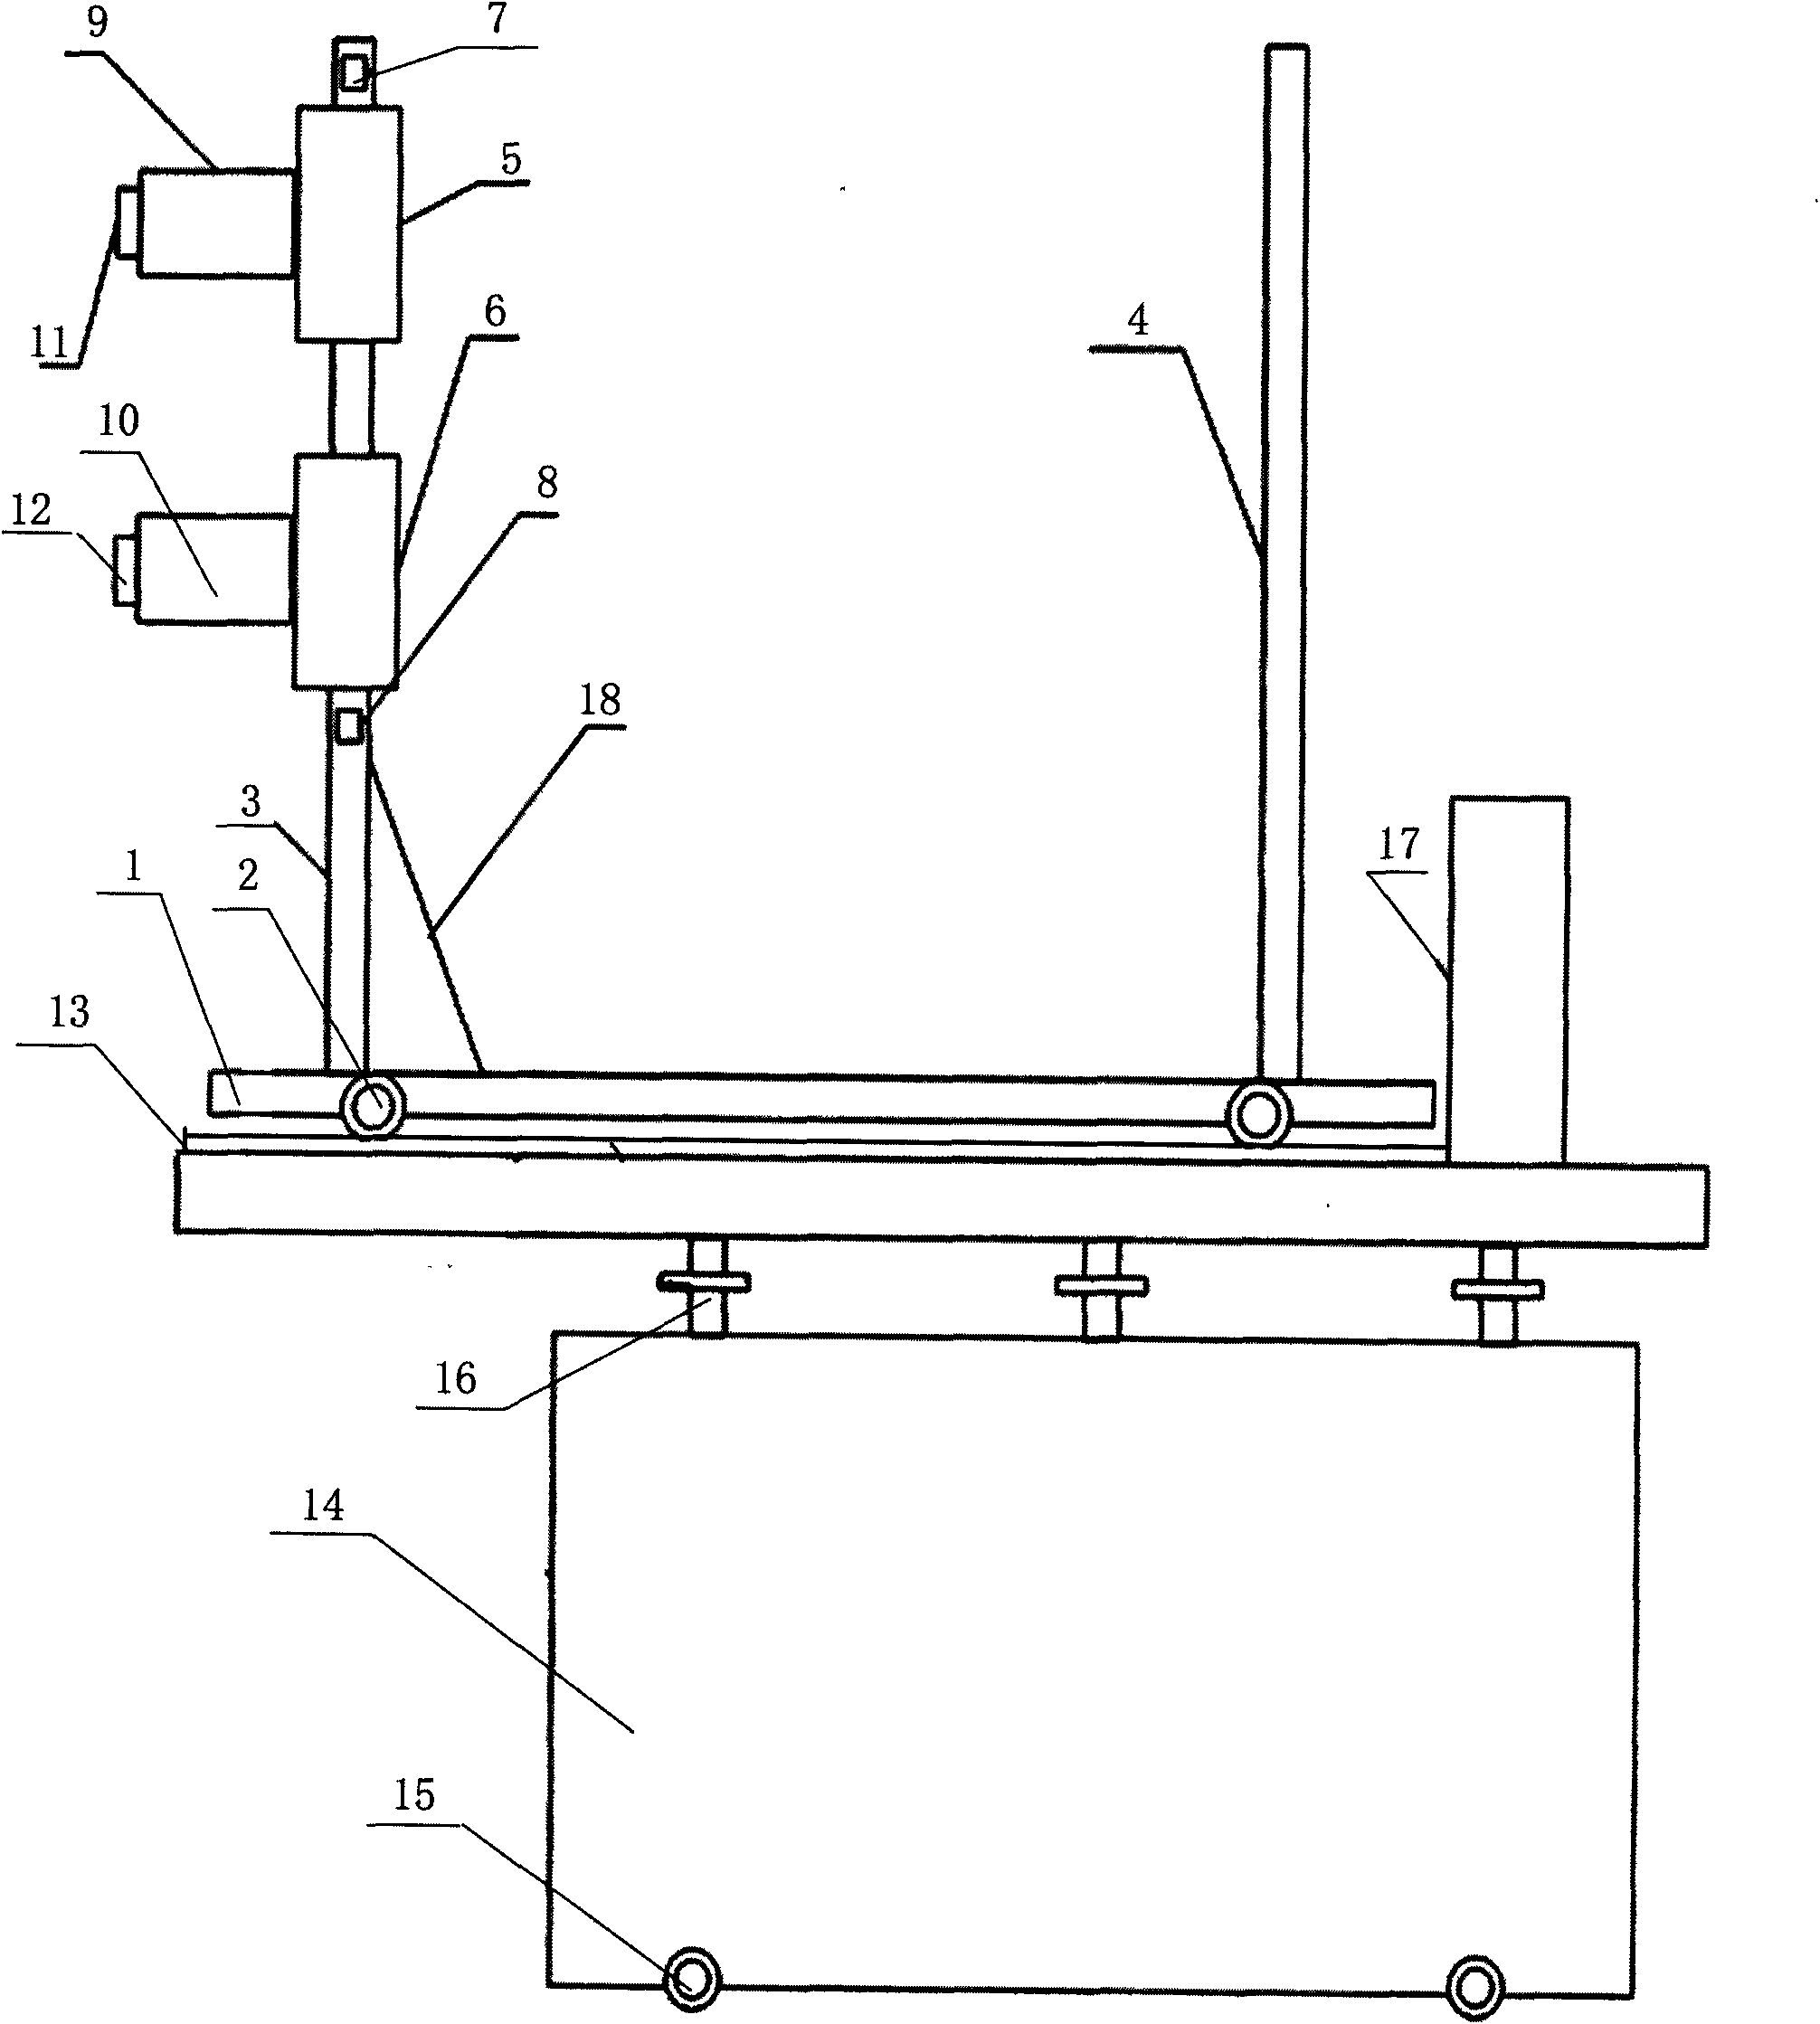 A device for simulating the running state of handcart switchgear